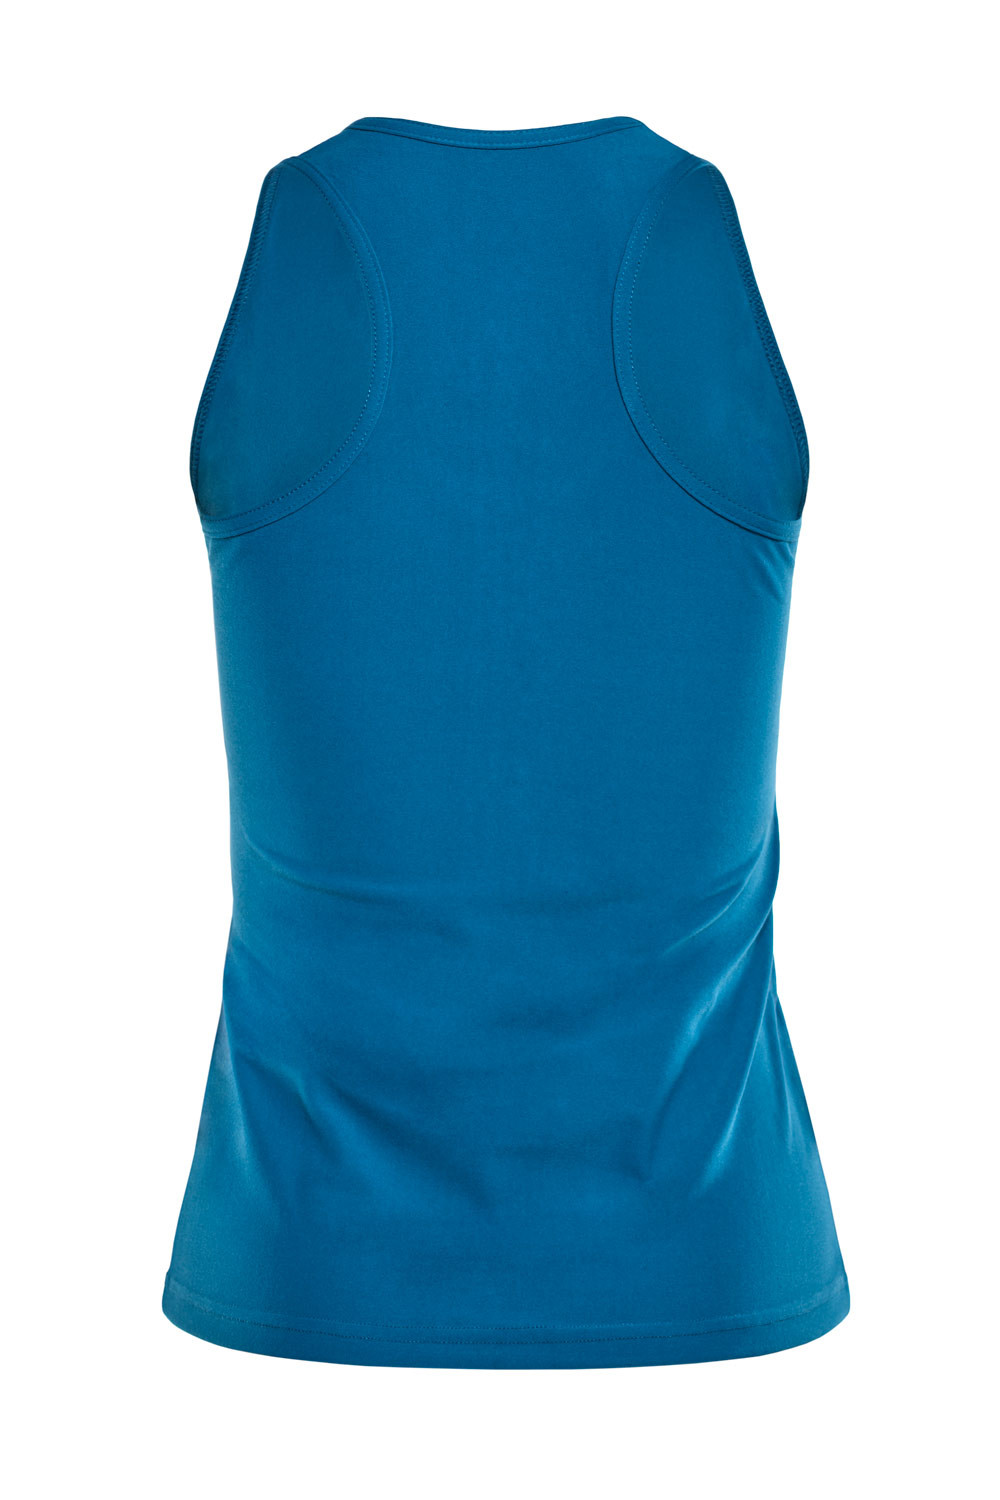 Functional Light and Soft Tanktop AET124LS, teal green, Winshape Ultra Soft  Style